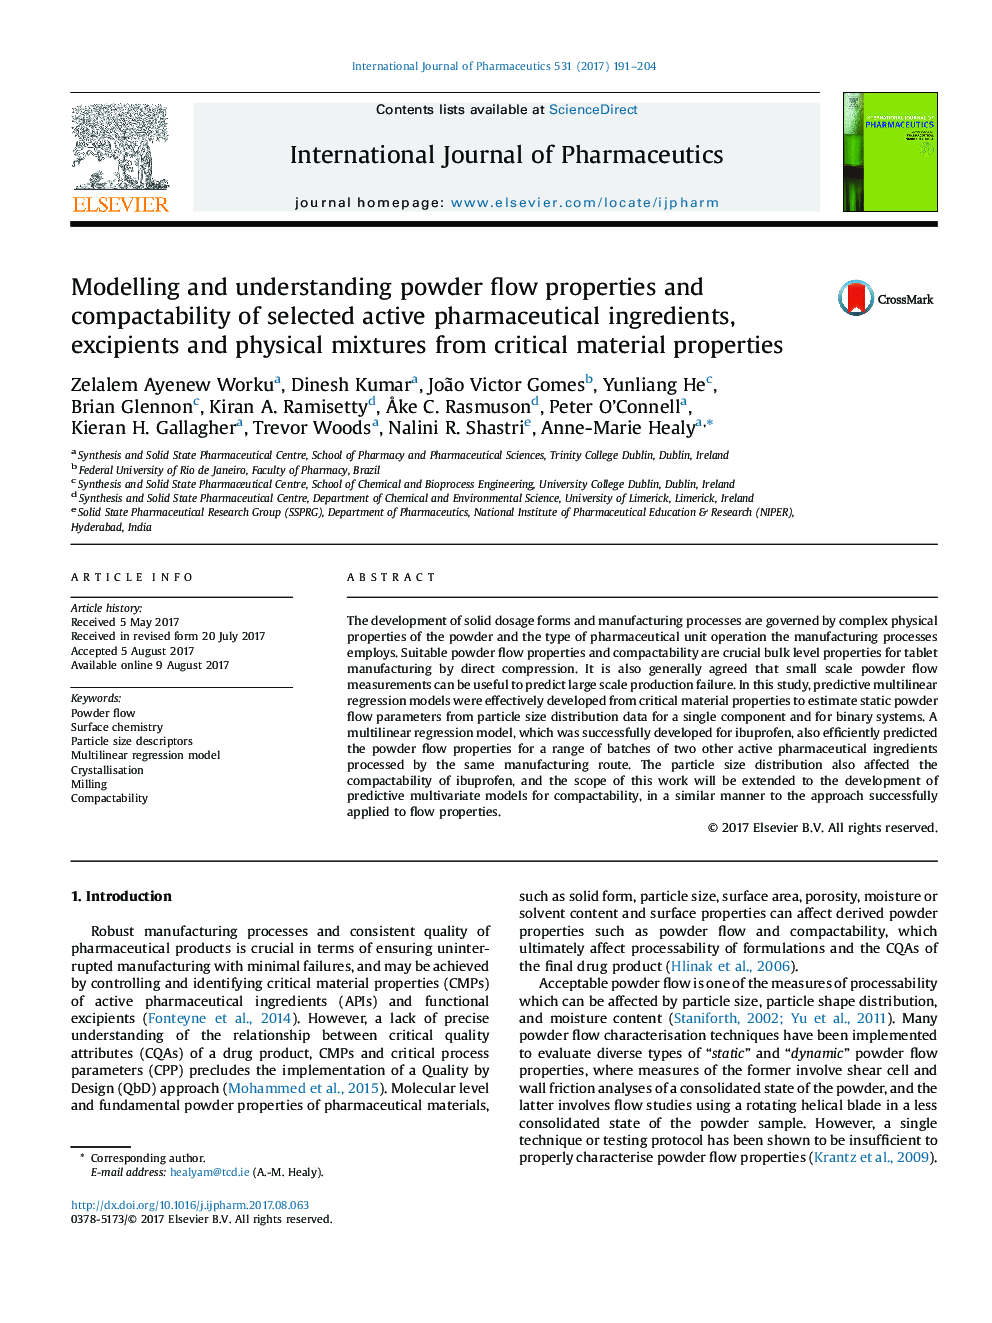 Modelling and understanding powder flow properties and compactability of selected active pharmaceutical ingredients, excipients and physical mixtures from critical material properties